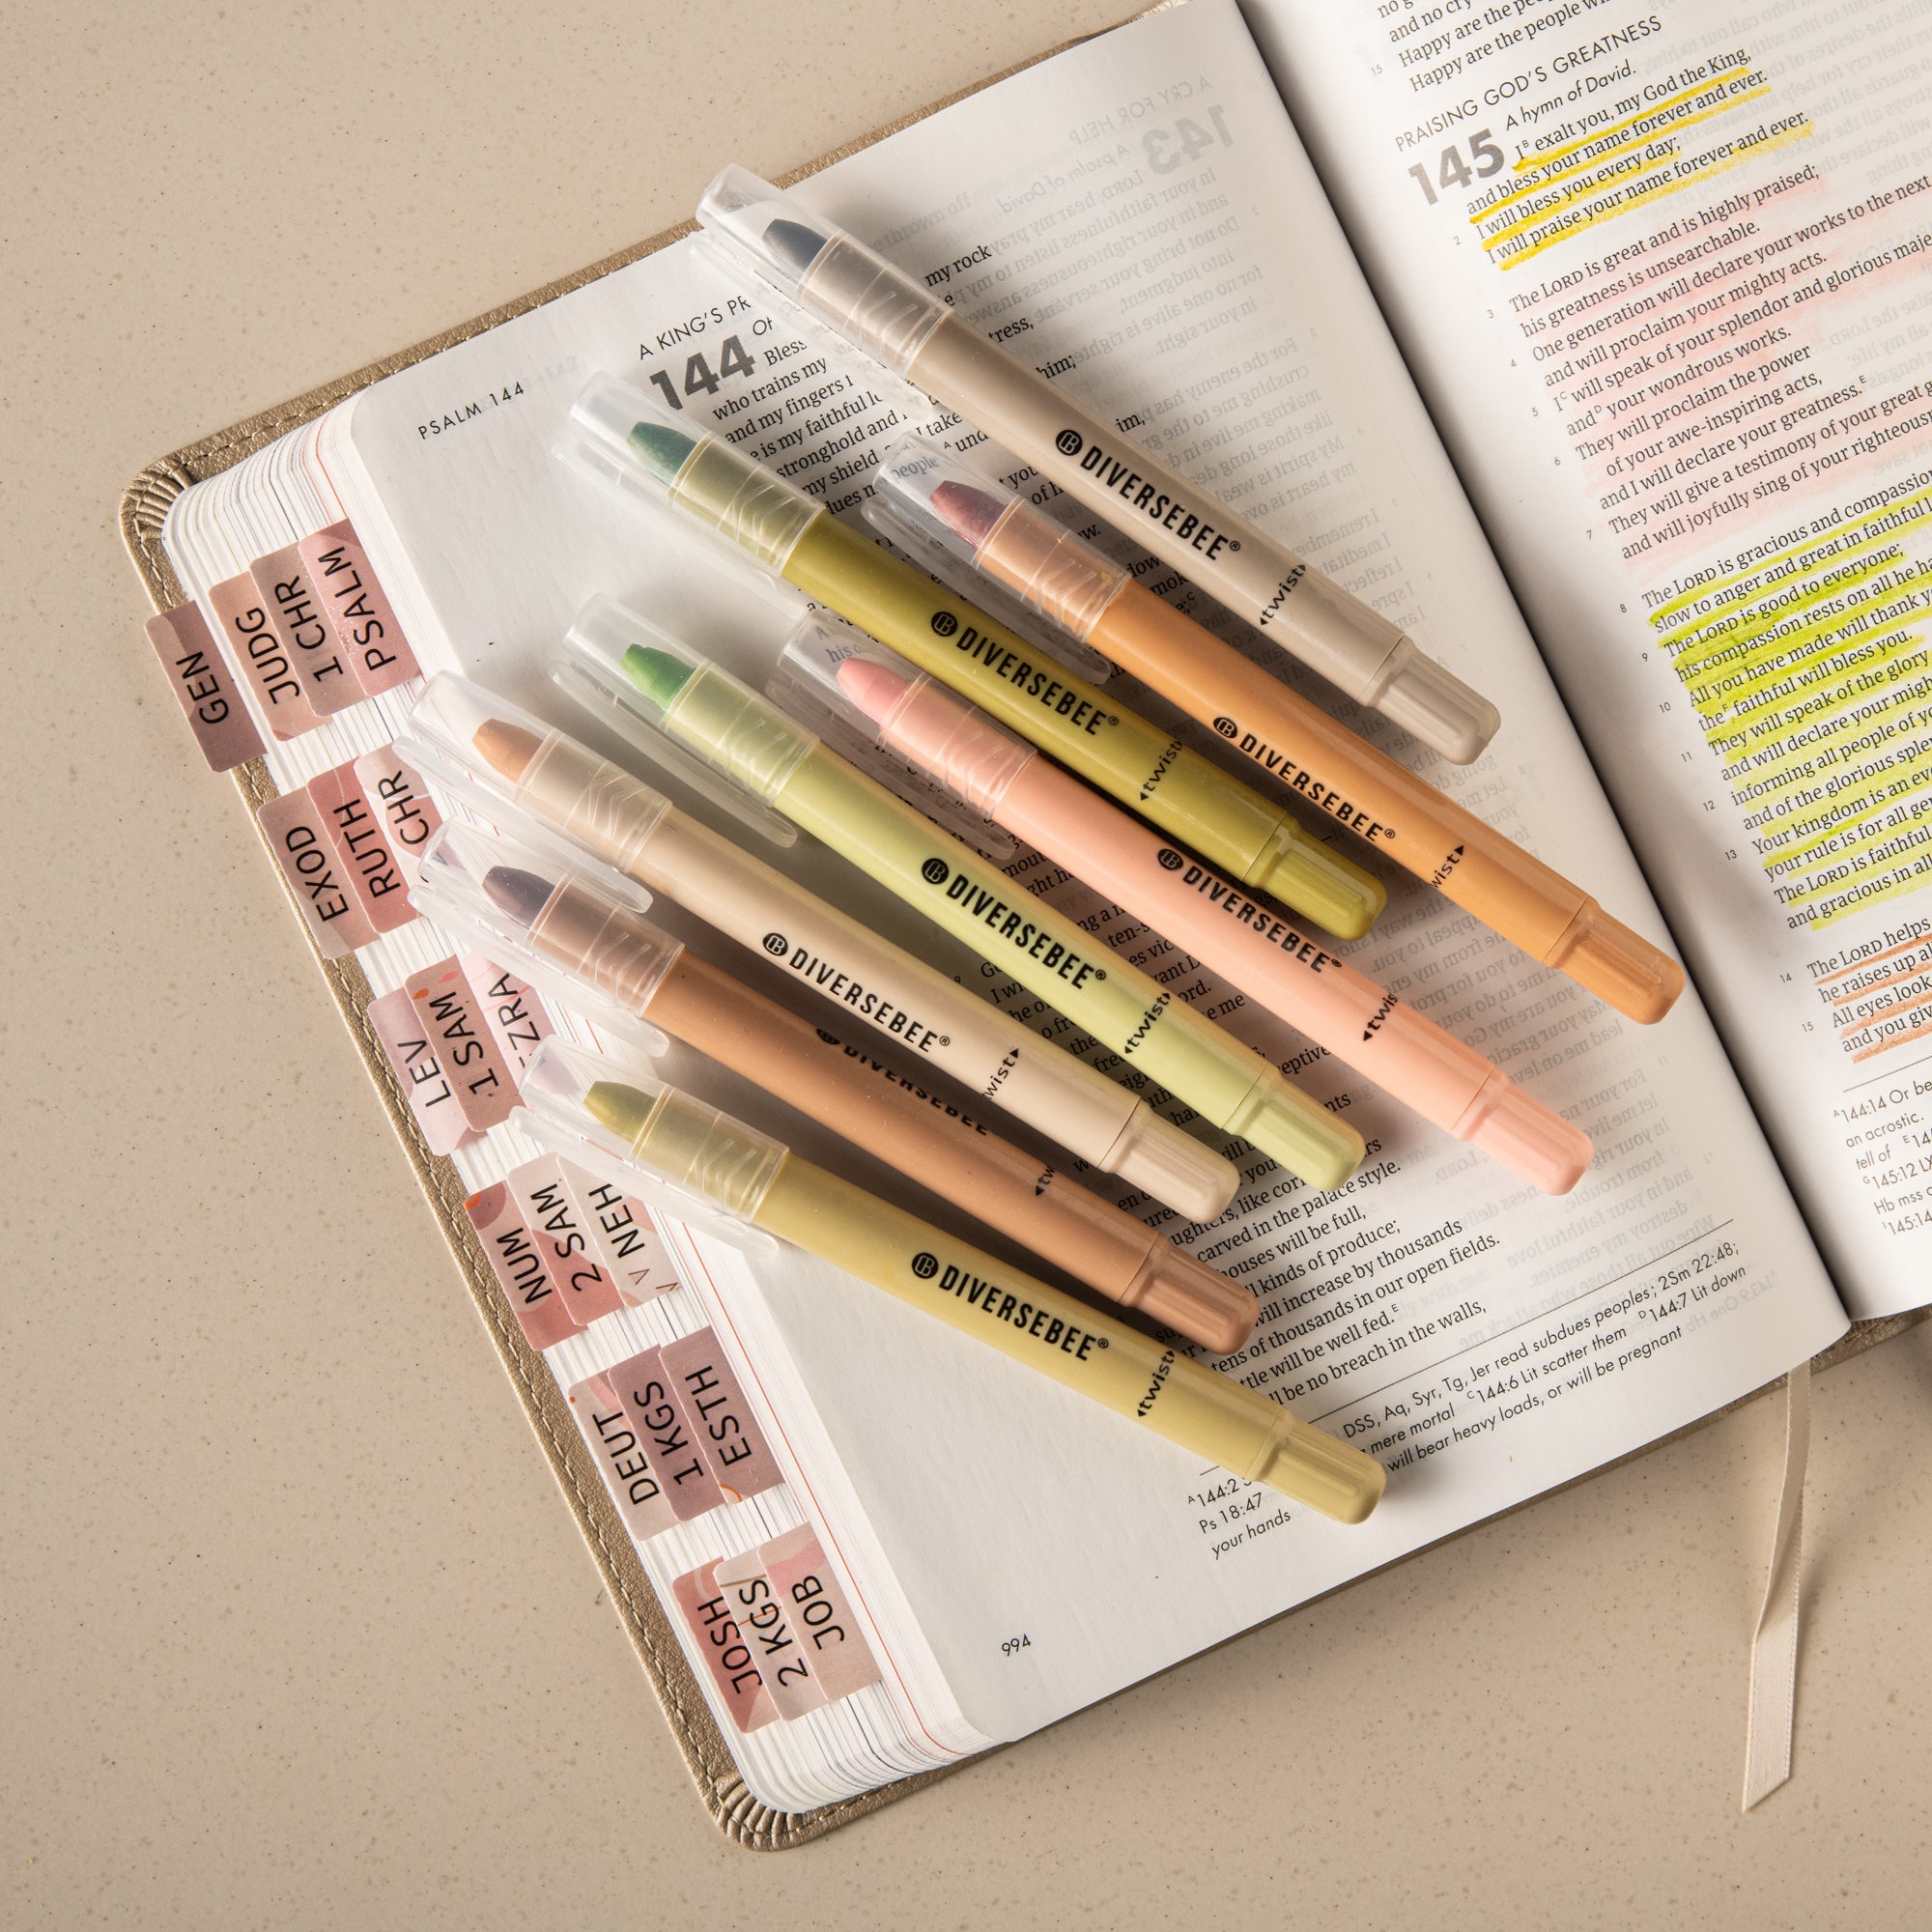 Mr. Pen- Bible Highlighters and Pens No Bleed, 8 Pack, Bible